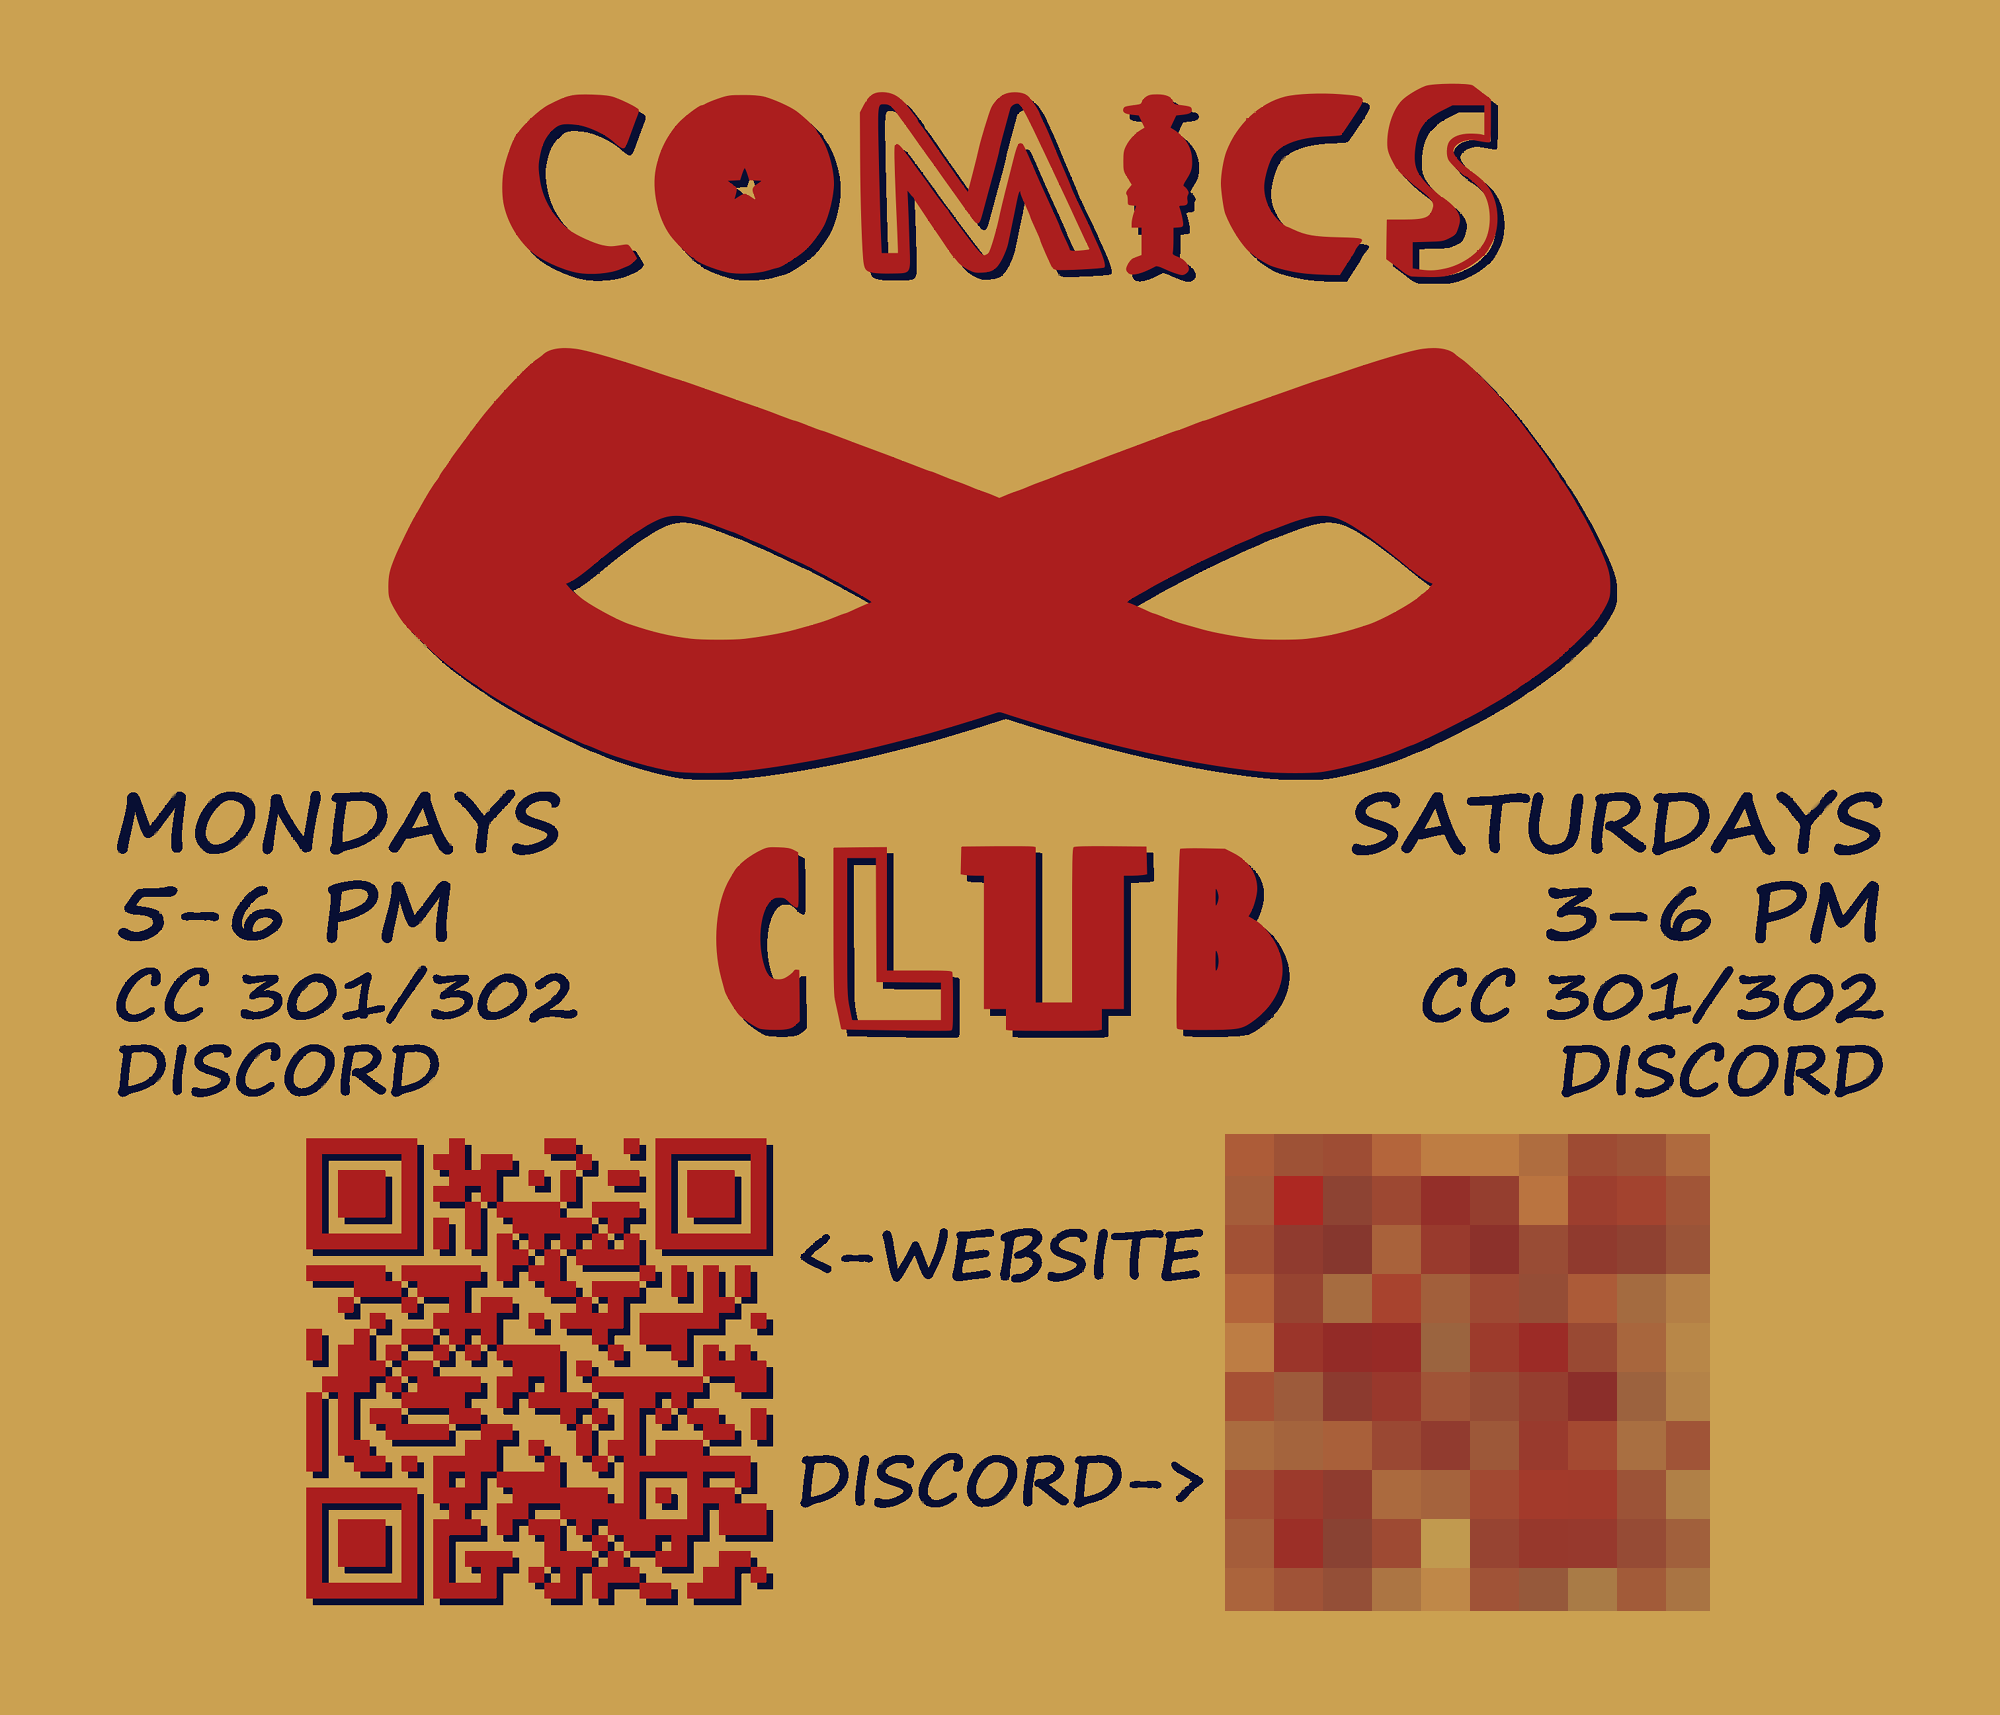 A poster with the 2020 logo for Allegheny College's Comics Club alongside information about club meetings and QR codes to relevant sites.